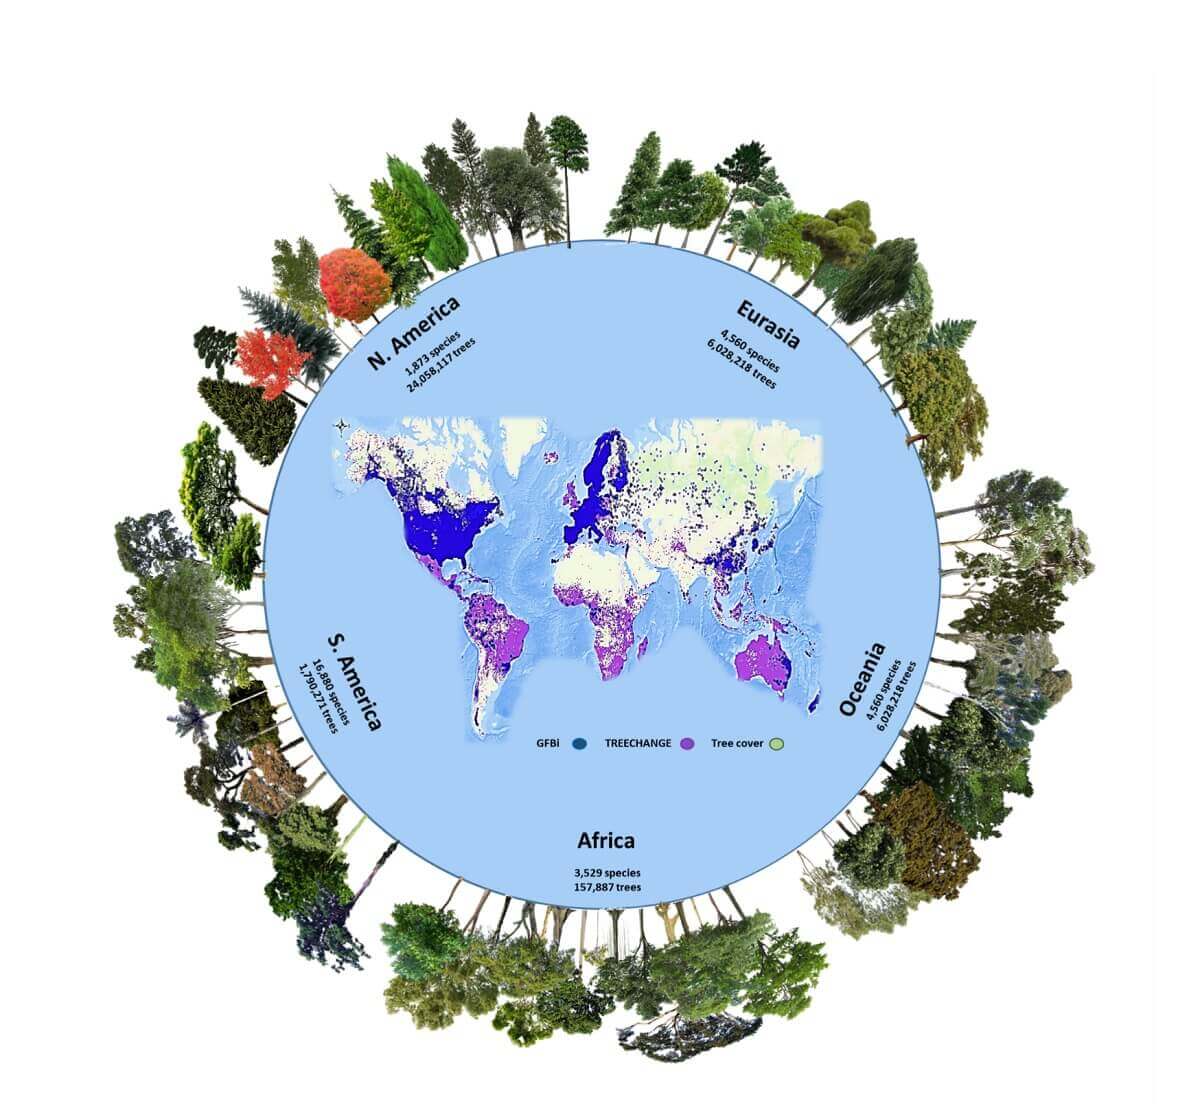 A global map showing how many tree species are located on different continents, providing the data to estimate undiscovered tree species